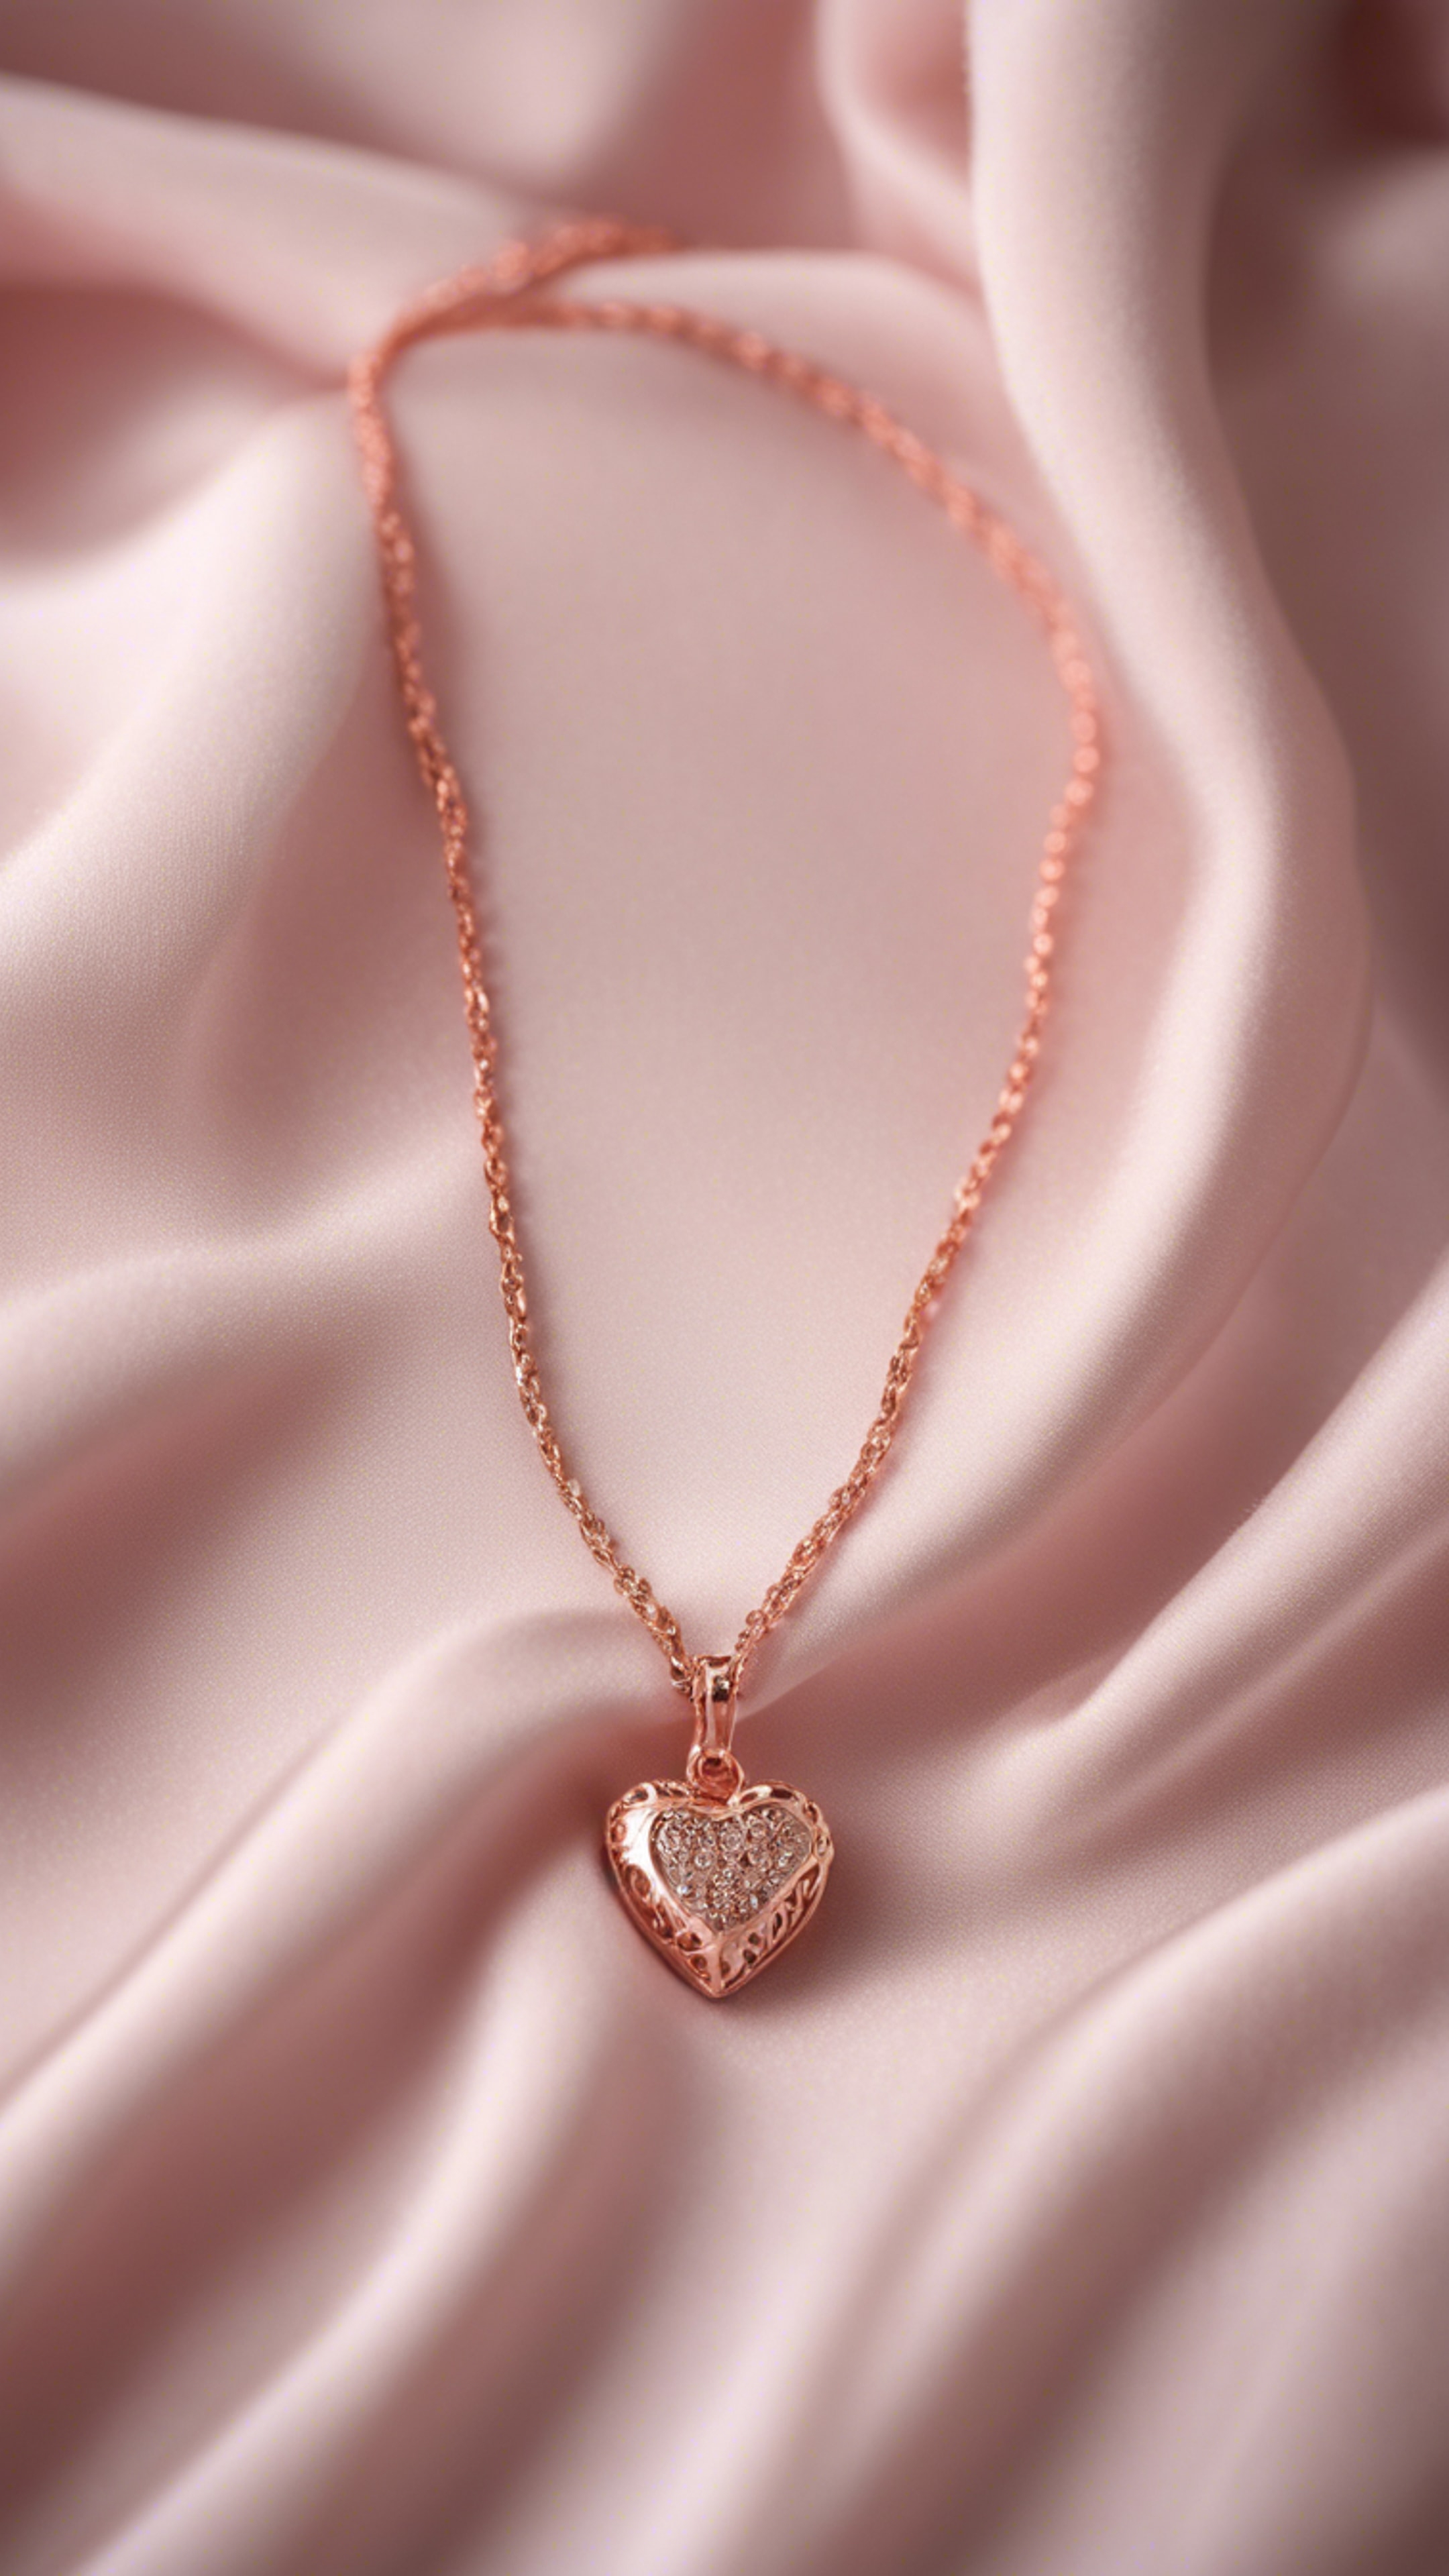 A delicate rose gold chain necklace with a small heart pendant, displayed on a soft pink satin fabric. Hintergrund[1bffd5f9a0f0499fae91]